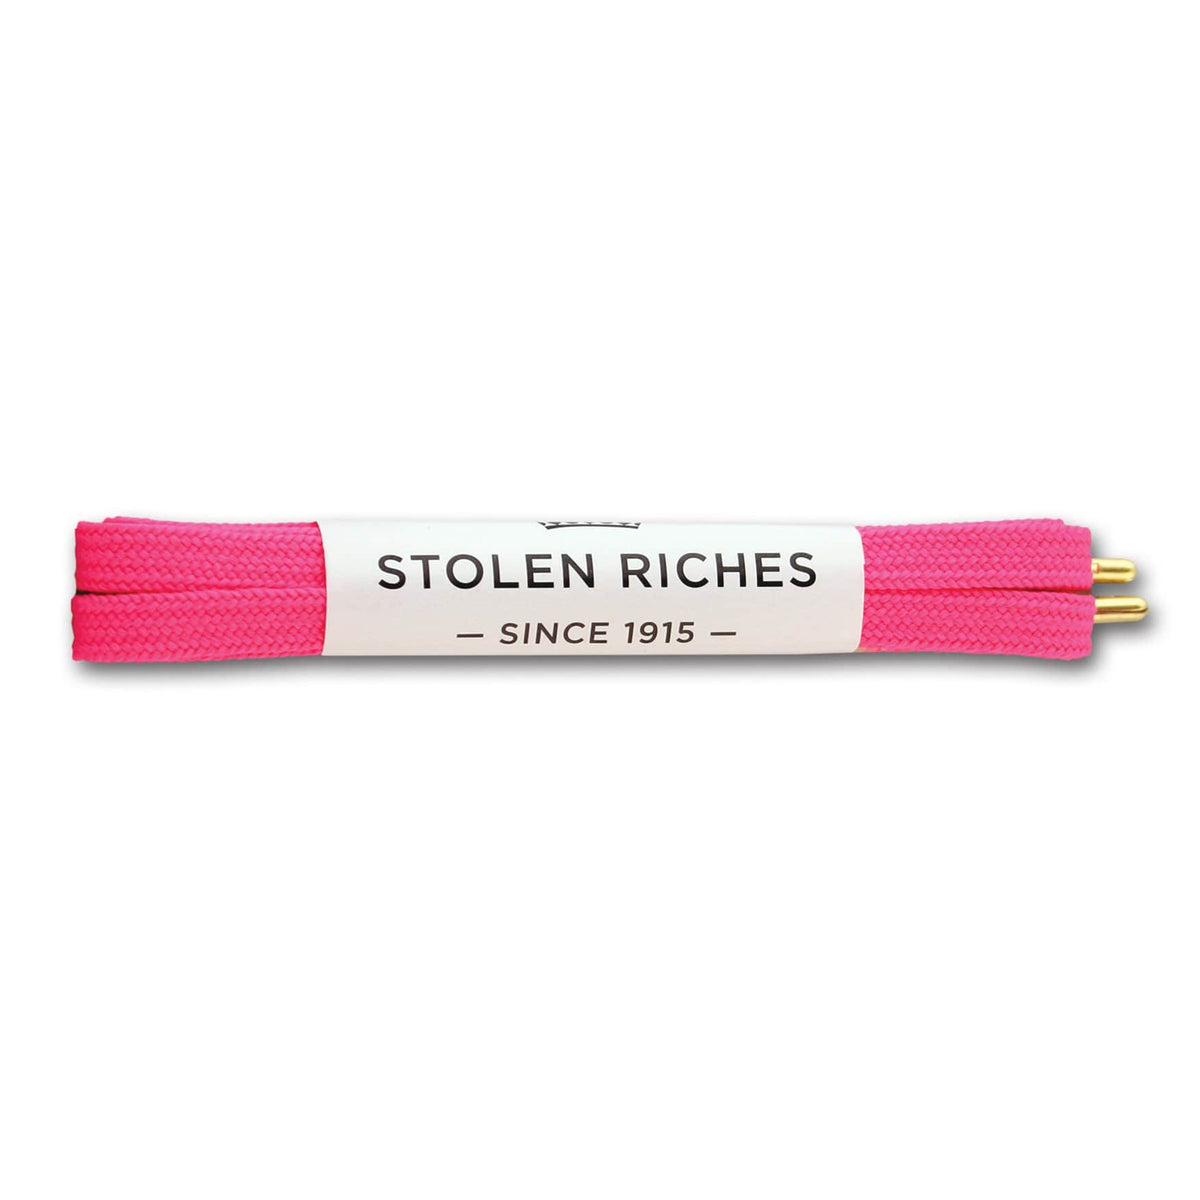 Neon pink laces for sneakers (Length: 45"/114cm) - Stolen Riches